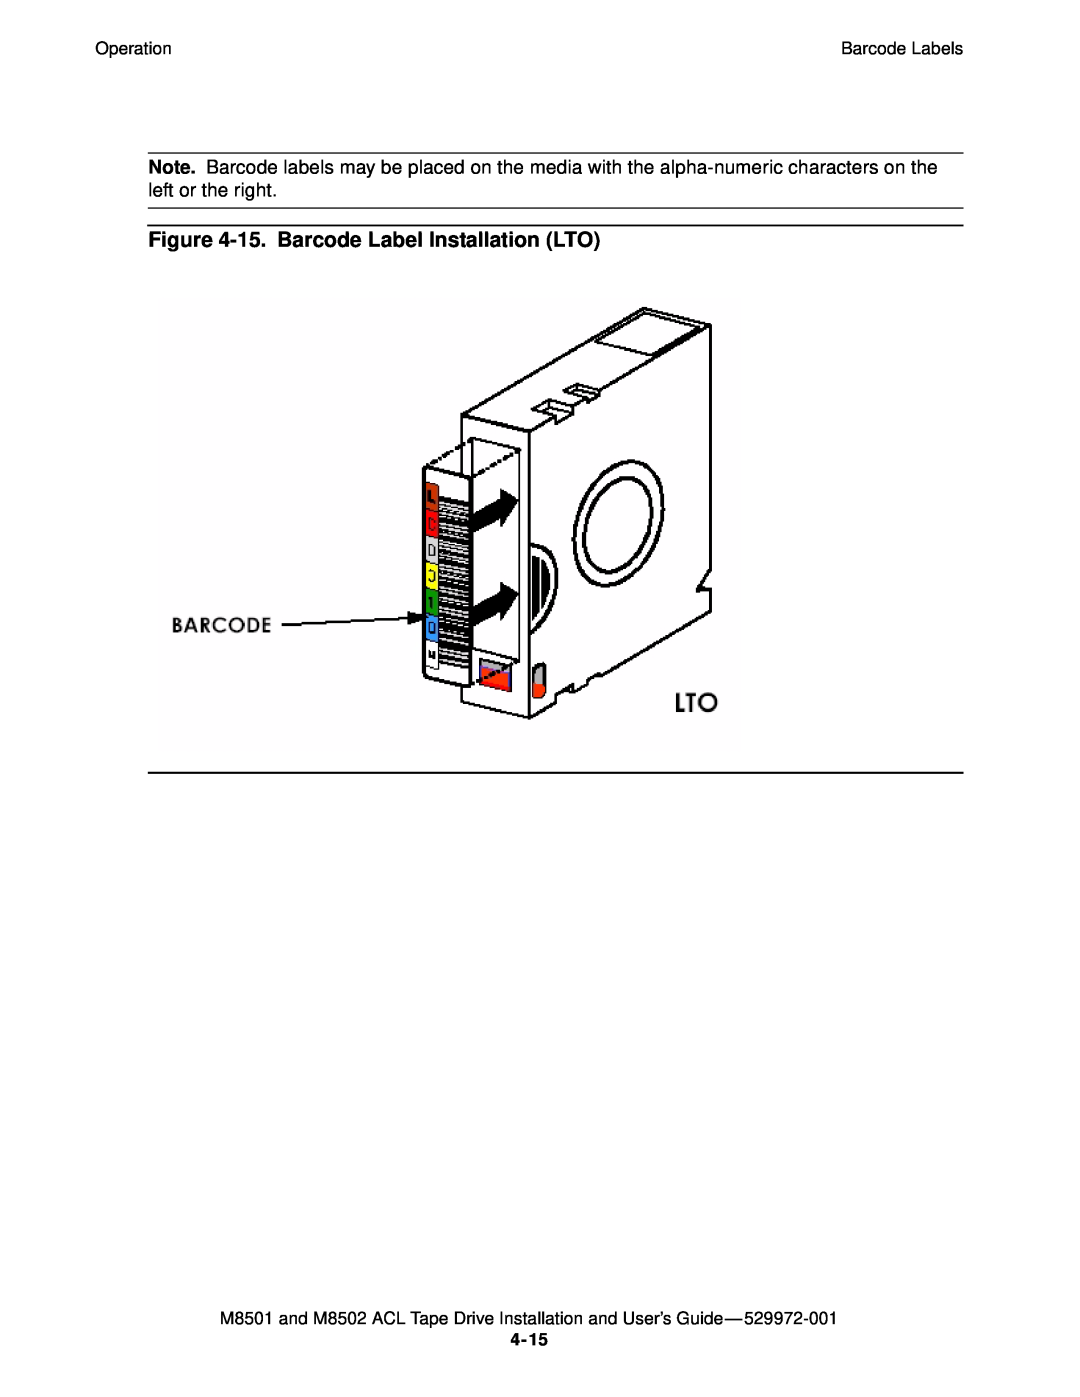 SMC Networks M8501 manual 15. Barcode Label Installation LTO, Operation, Barcode Labels, 4-15 